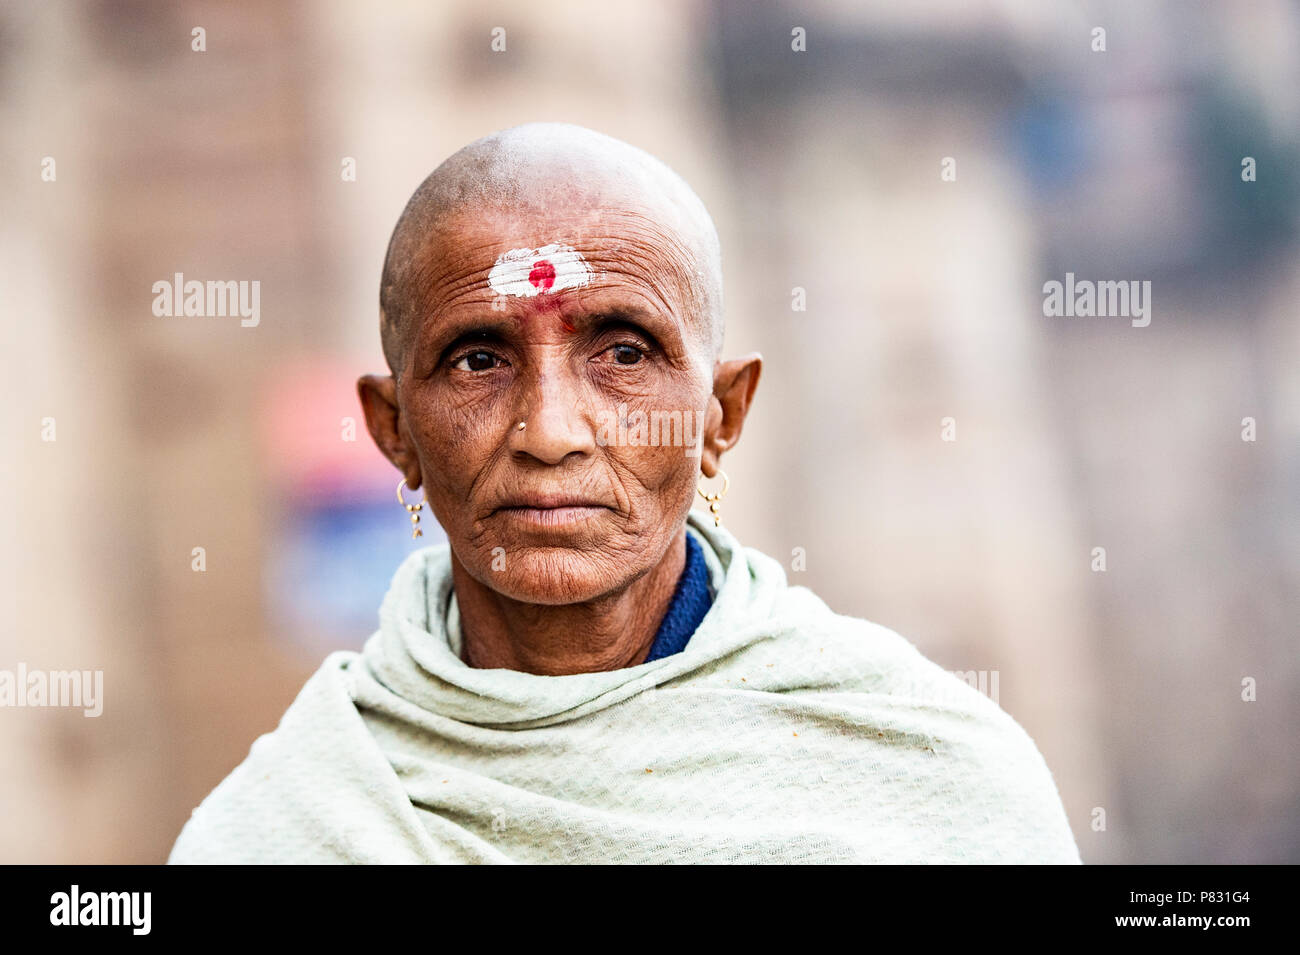 VARANASI - INDIA - 13 JANUARY 2018. Portrait of a sad and shaved old man walking on the ghat in Varanasi also known as Benares, India. Stock Photo